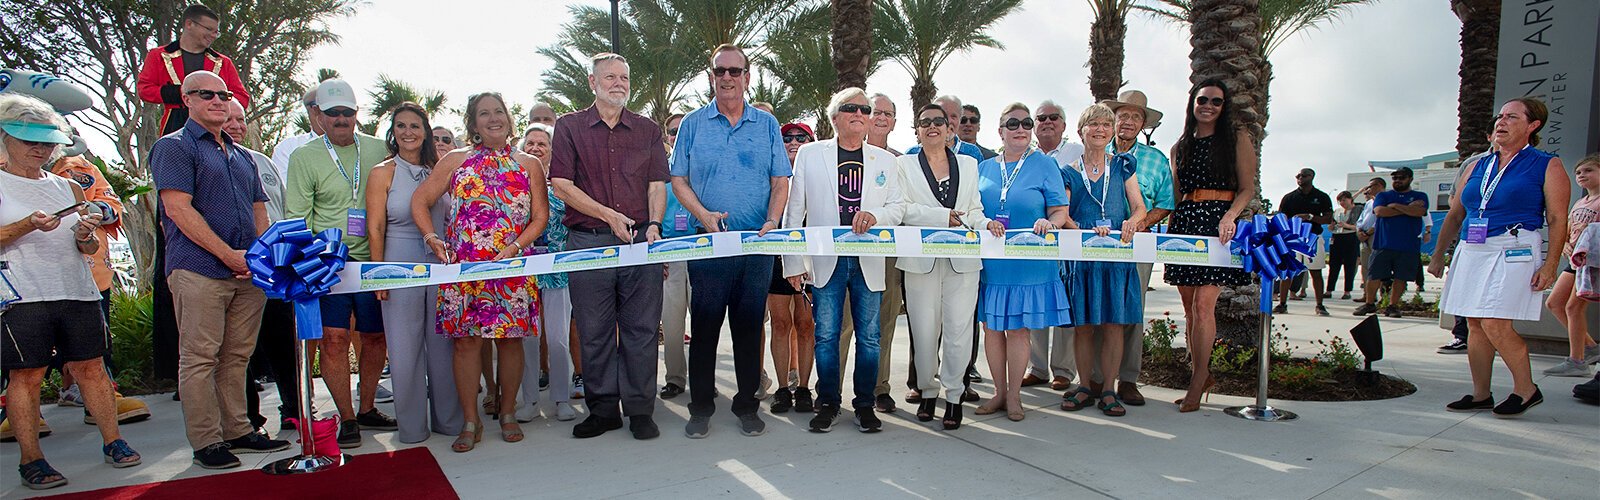 Clearwater Mayor Brian Aungst Sr. and other dignitaries cut the ribbon to officially open the new Coachman Park and concert venue The Sound.